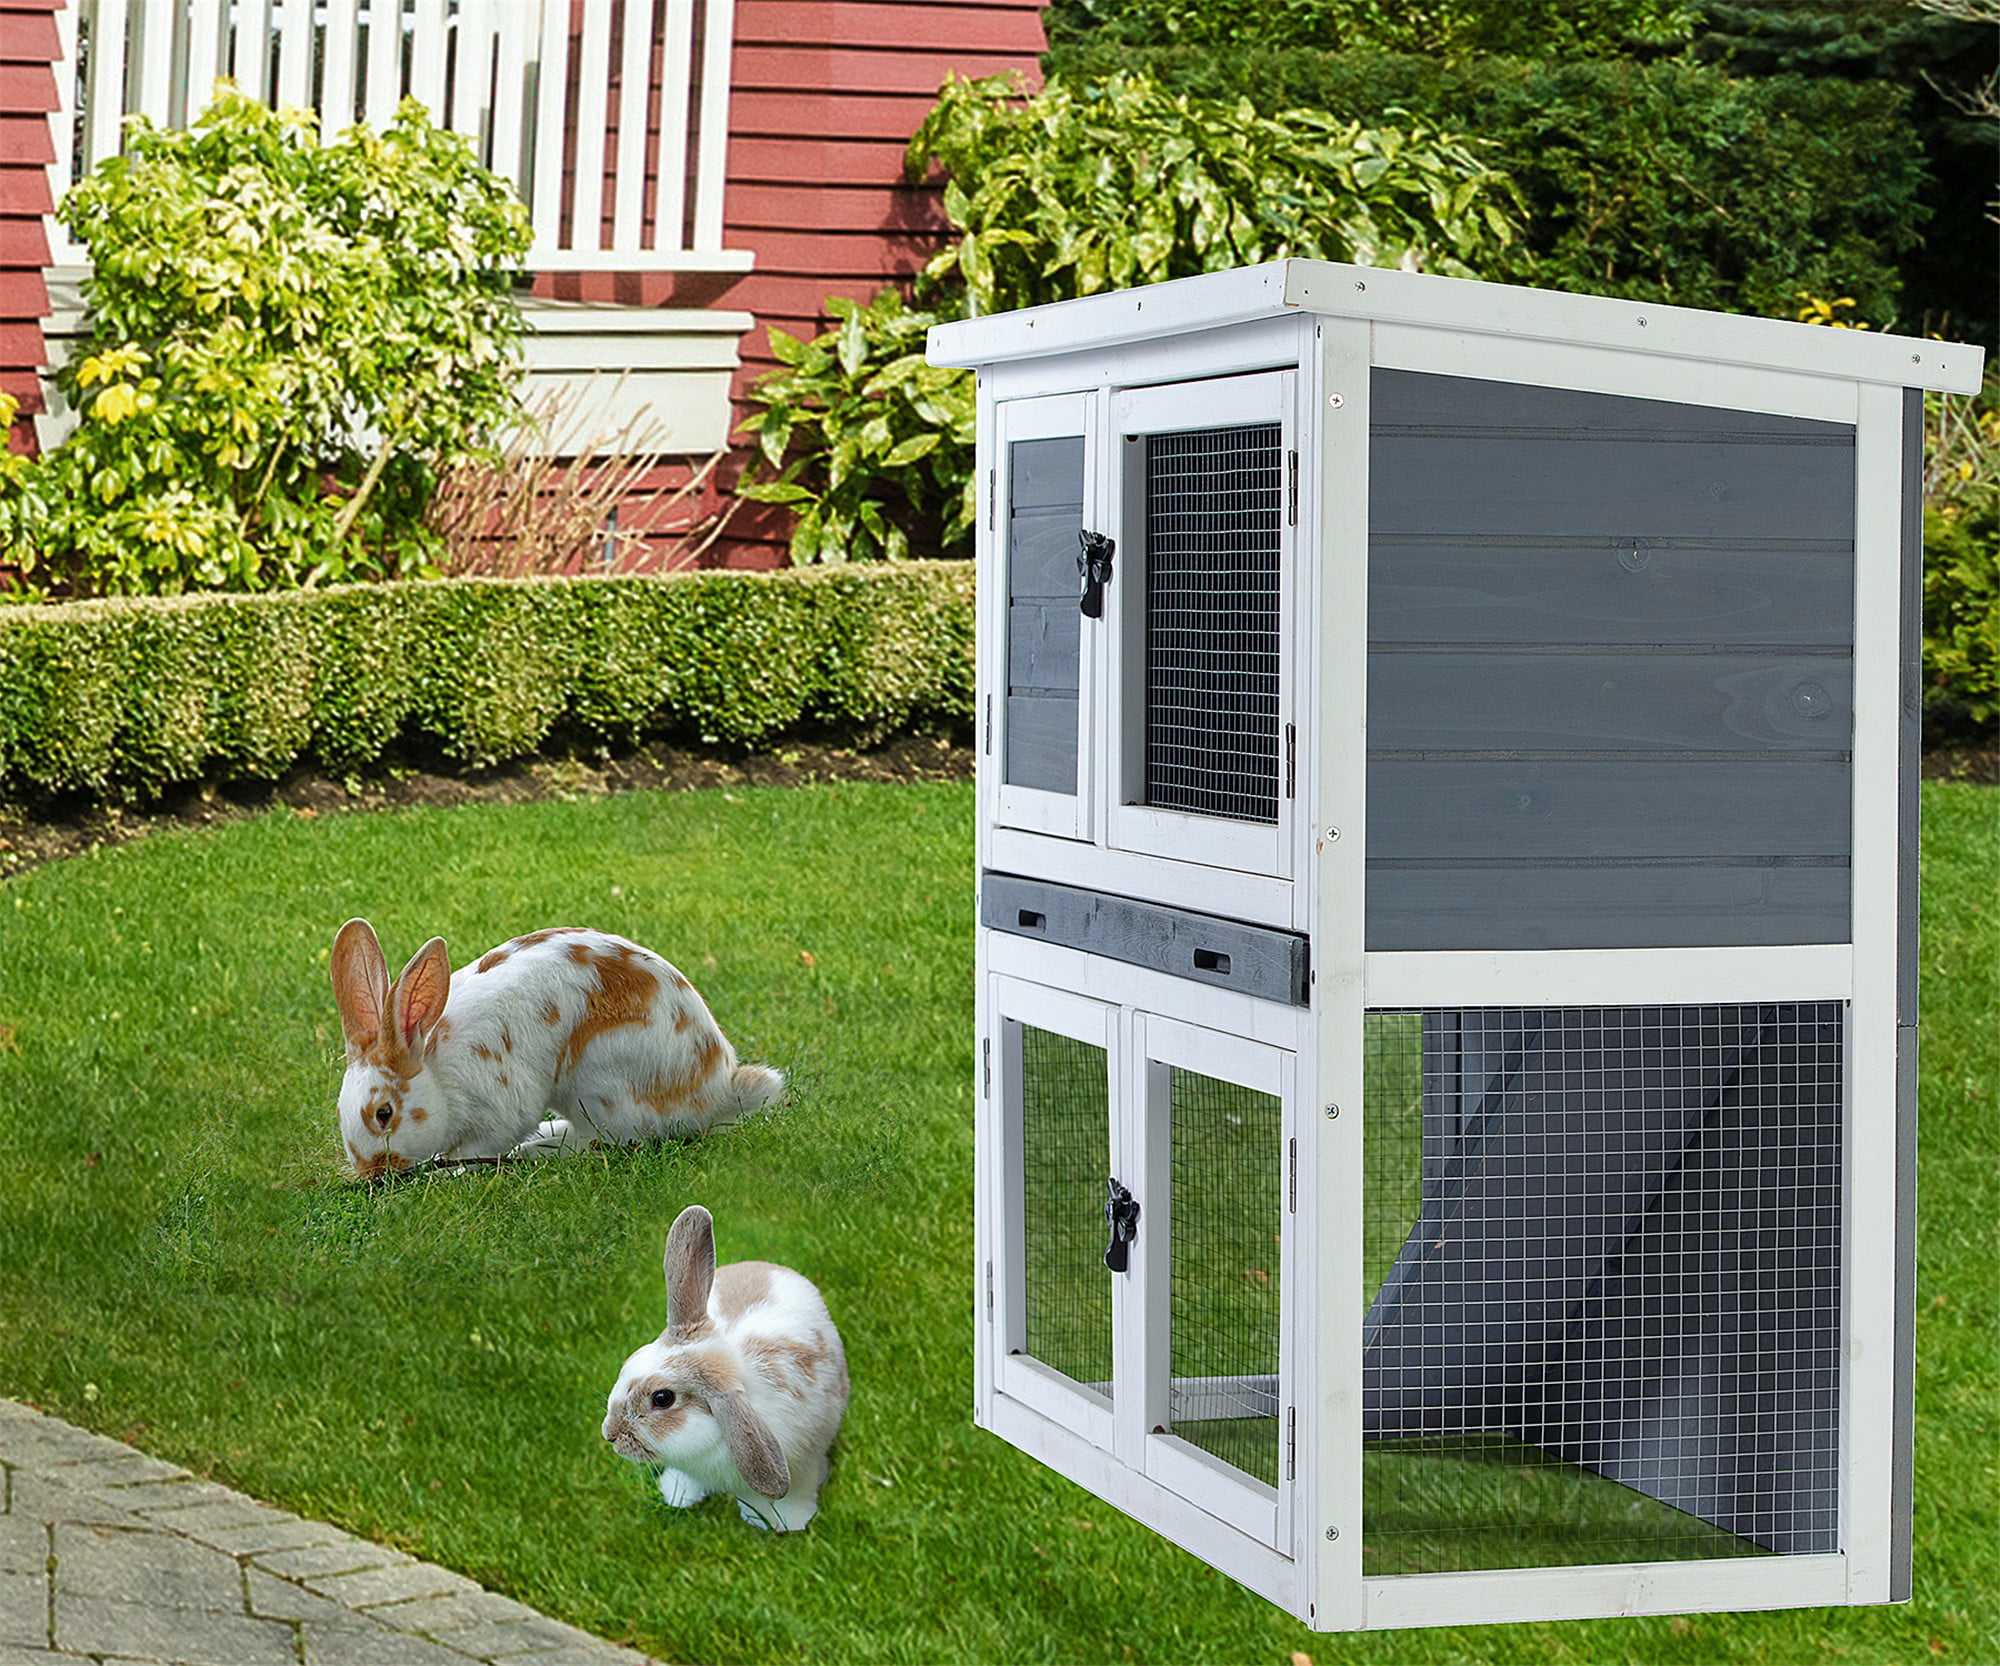 Rabbit Hutch for 2 Rabbits Wooden Hen House Guinea Pigs Bunny Cage with Pull Out Tray Run 2020 Chickens Lovupet Chicken Coop Outdoor Indoor Bunnies 